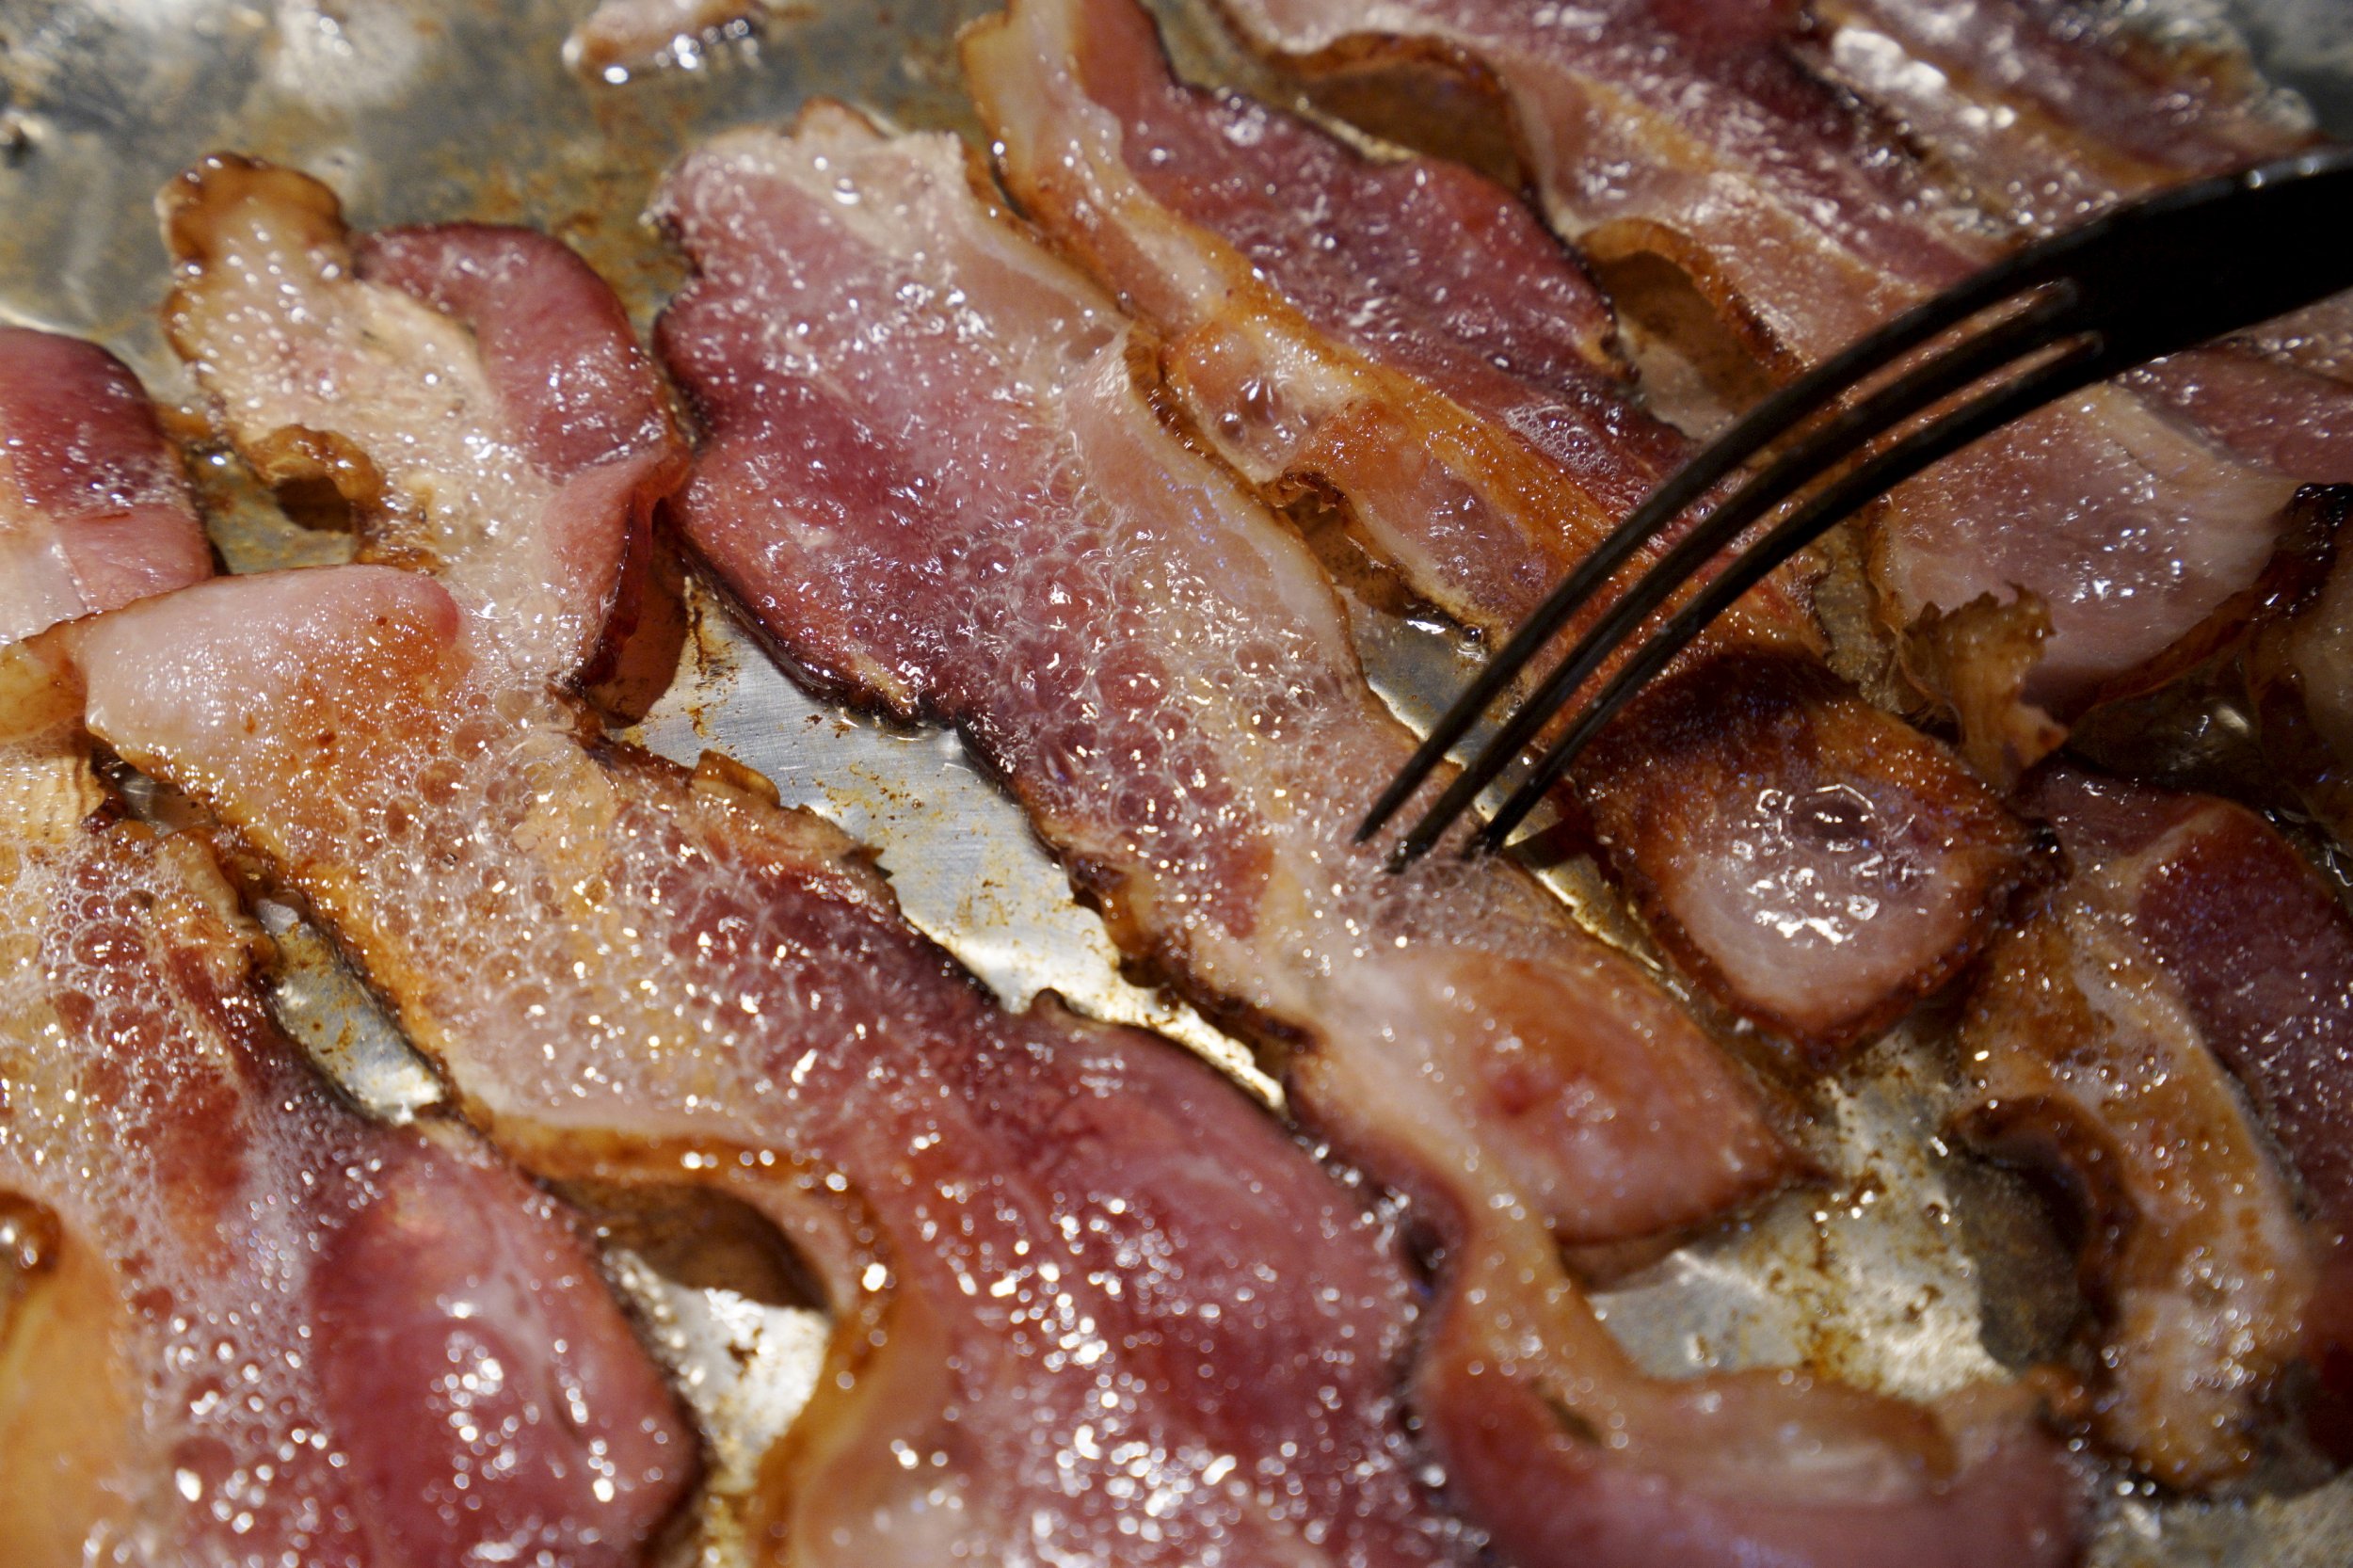 Bacon Causes Cancer. Why?